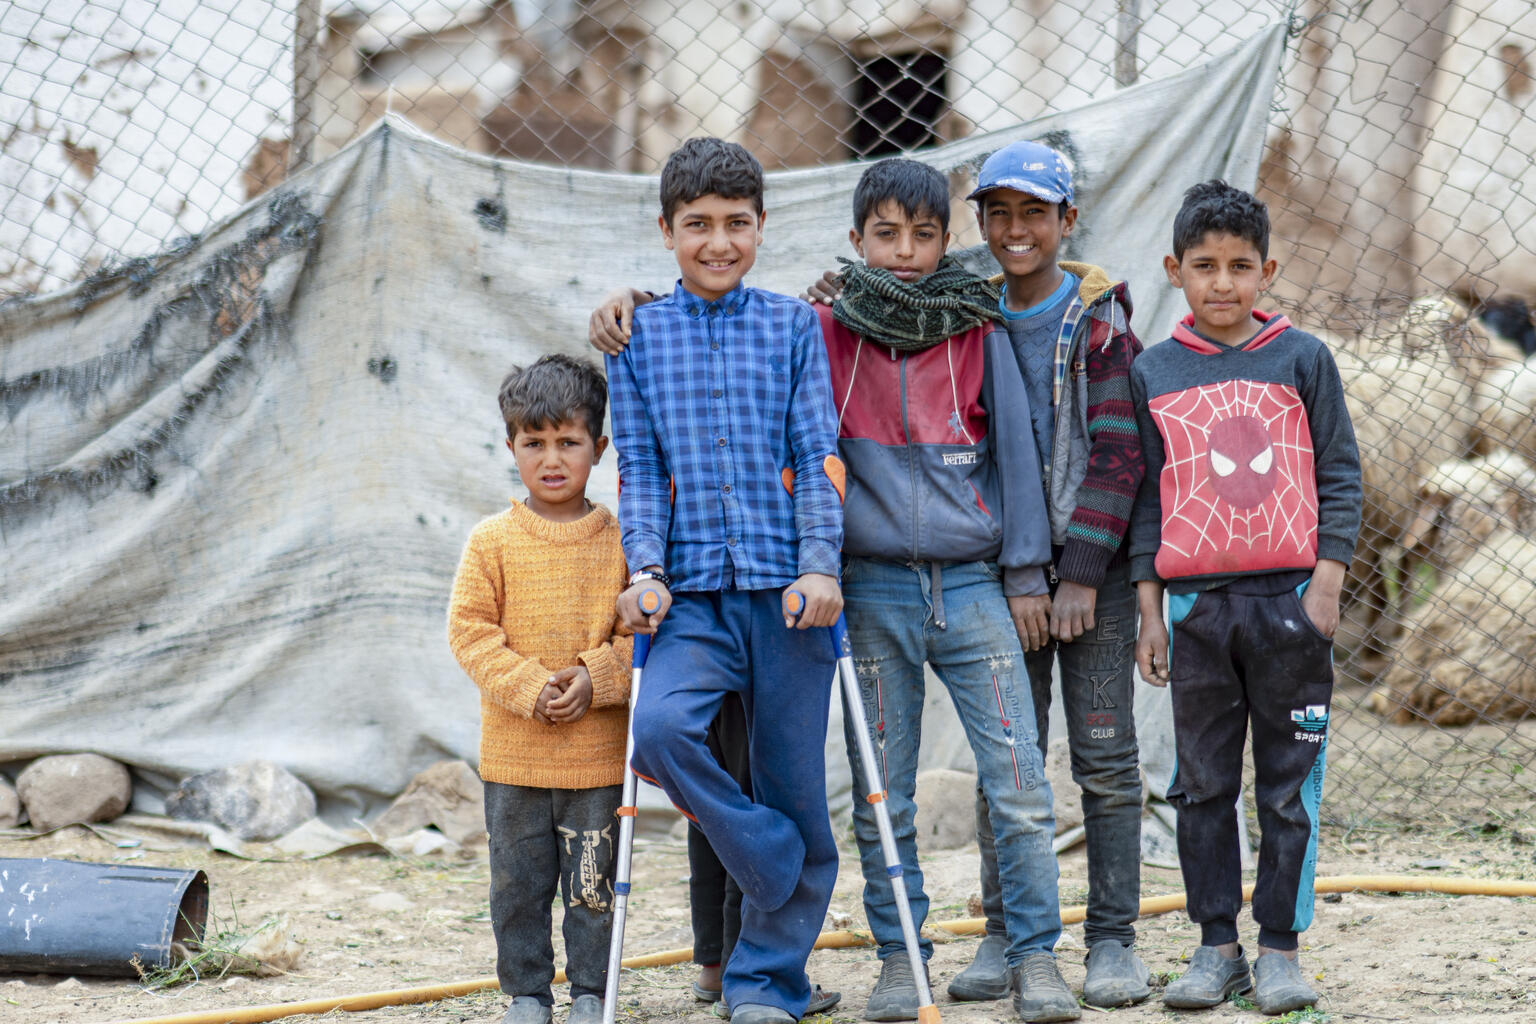 Jumaa, 12, with his friends and siblings in Abu Abdeh village, east rural Aleppo, Syria, on 19 April 2022. “I was collecting truffles with my family when I stepped on the mine,” said Jumaa, 12, recalling the time he lost his foot a year ago. Photo credit: UNICEFAdel Janji UN0646048